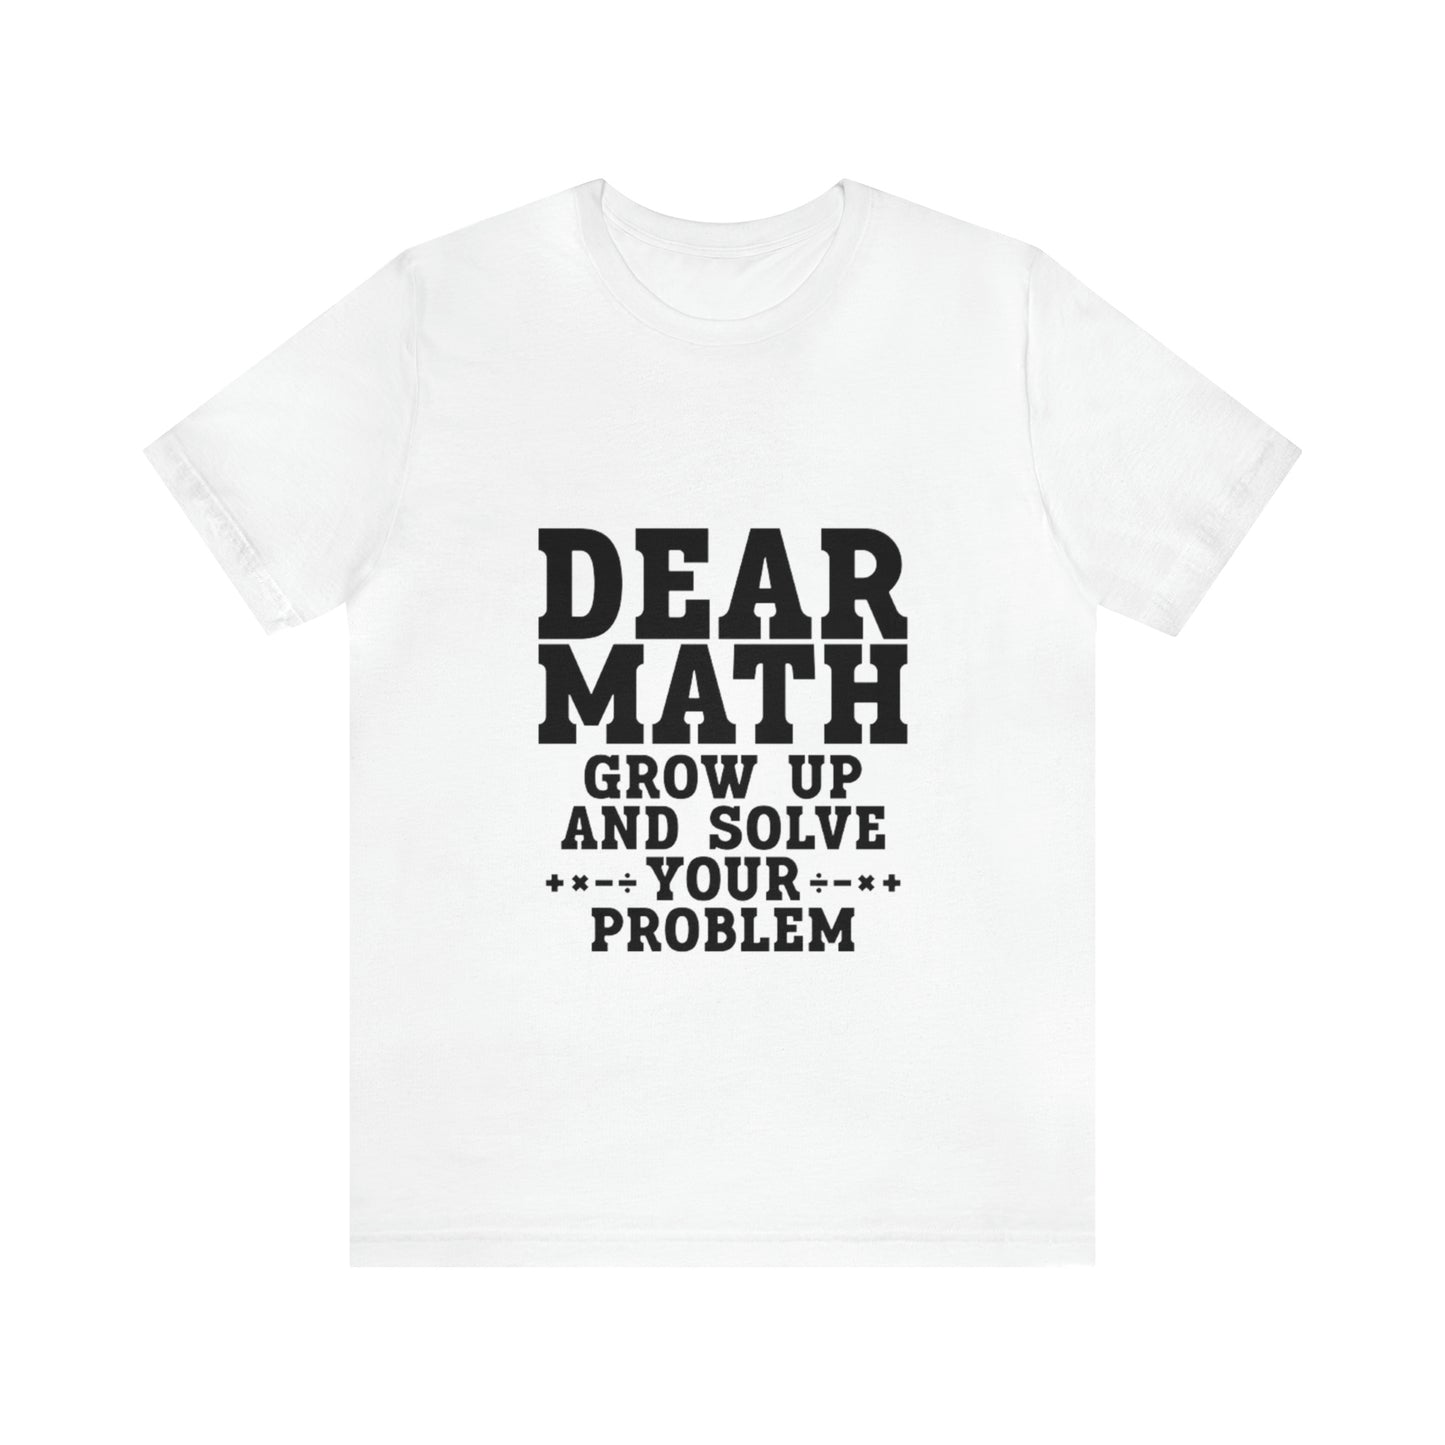 "Dear math, Grow up and solve your own problems"  Tee